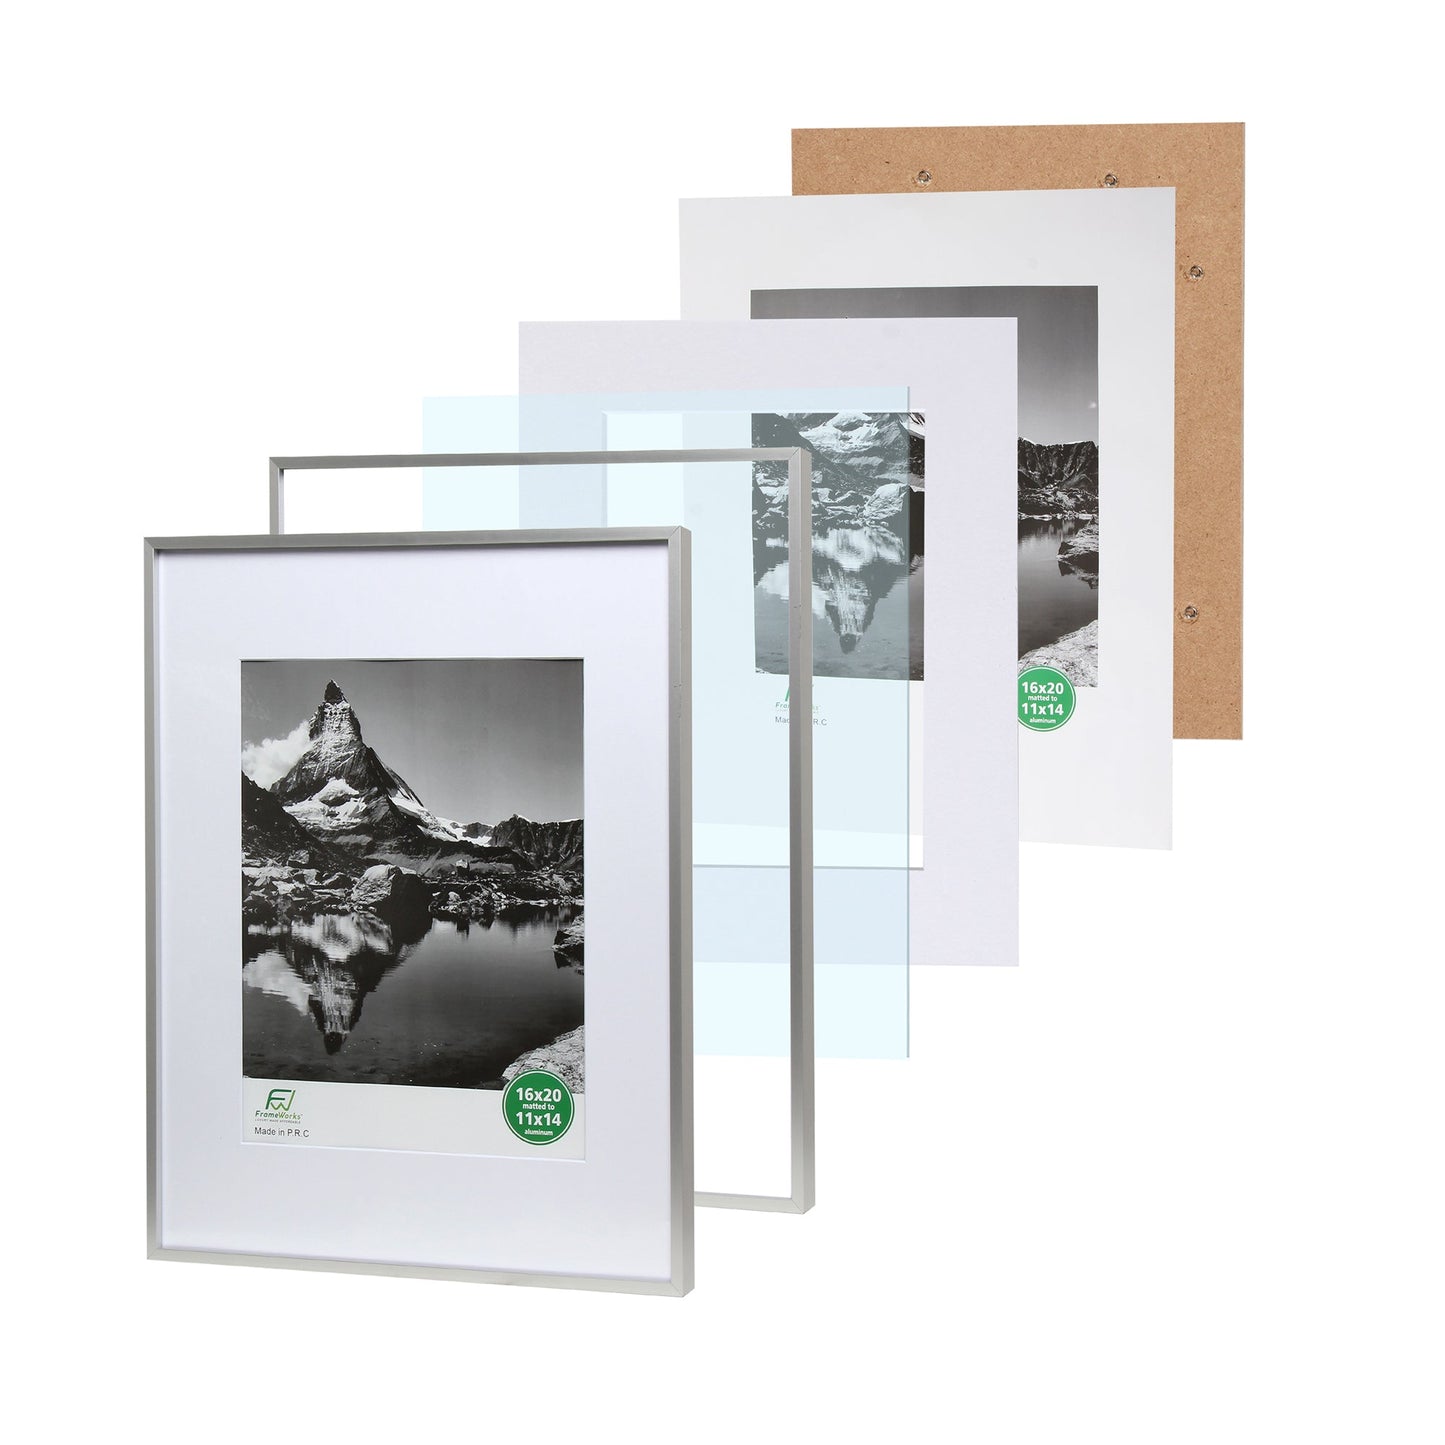 16" x 20" Deluxe Silver Aluminum Contemporary Picture Frame, 11" x 14" Matted